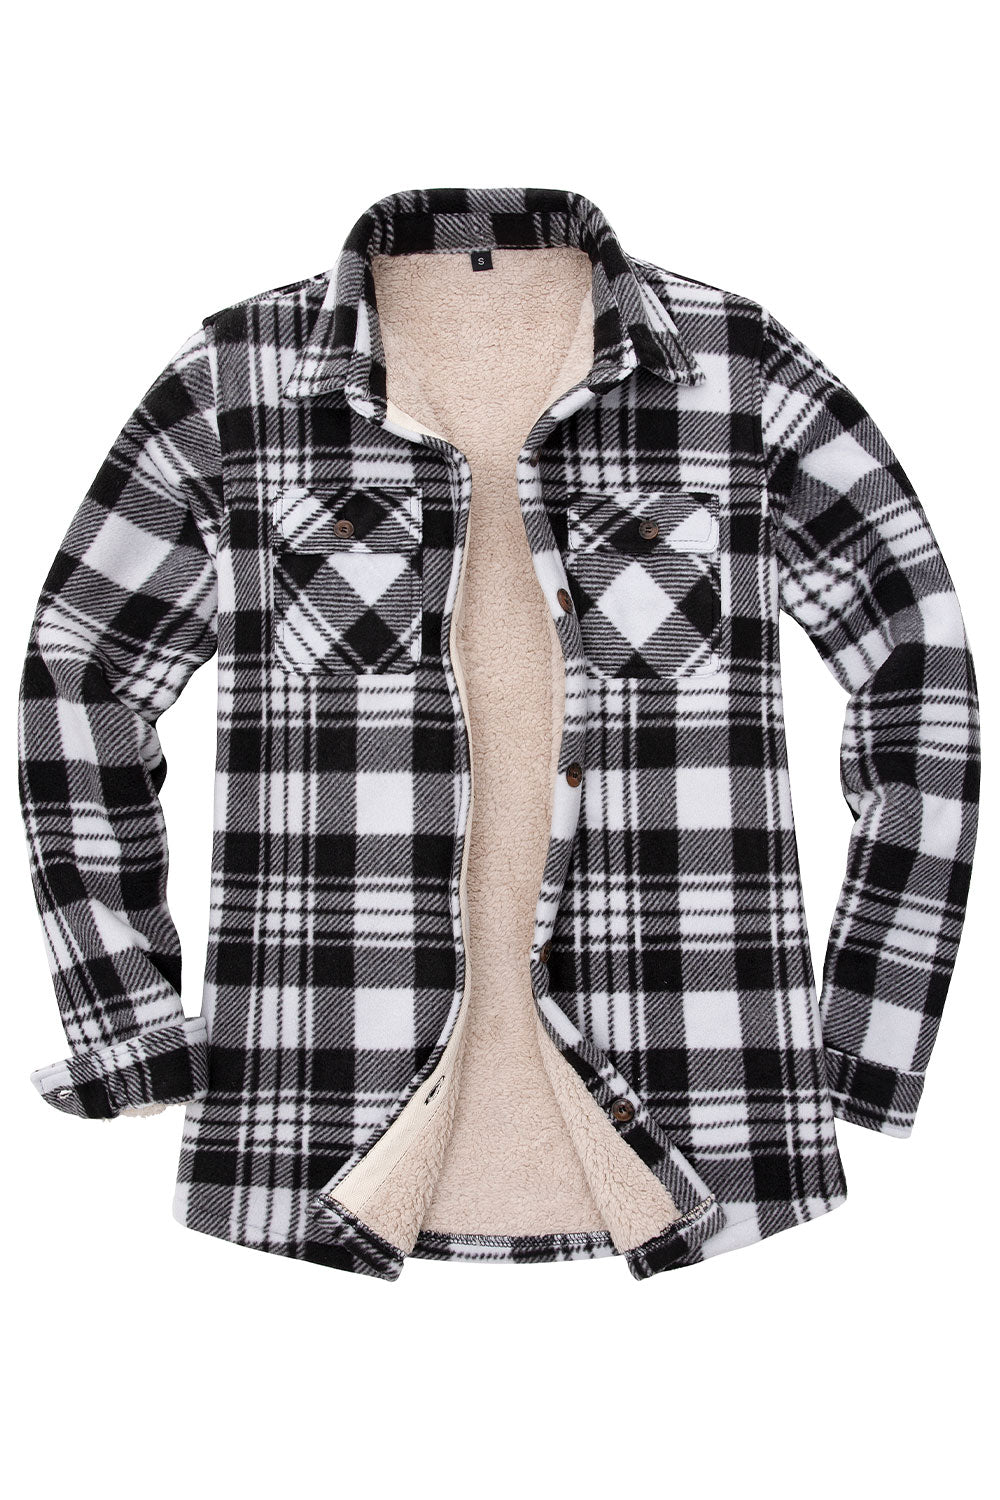 Matching Family Outfits - Women's Button Up Black White Plaid Jacket ...